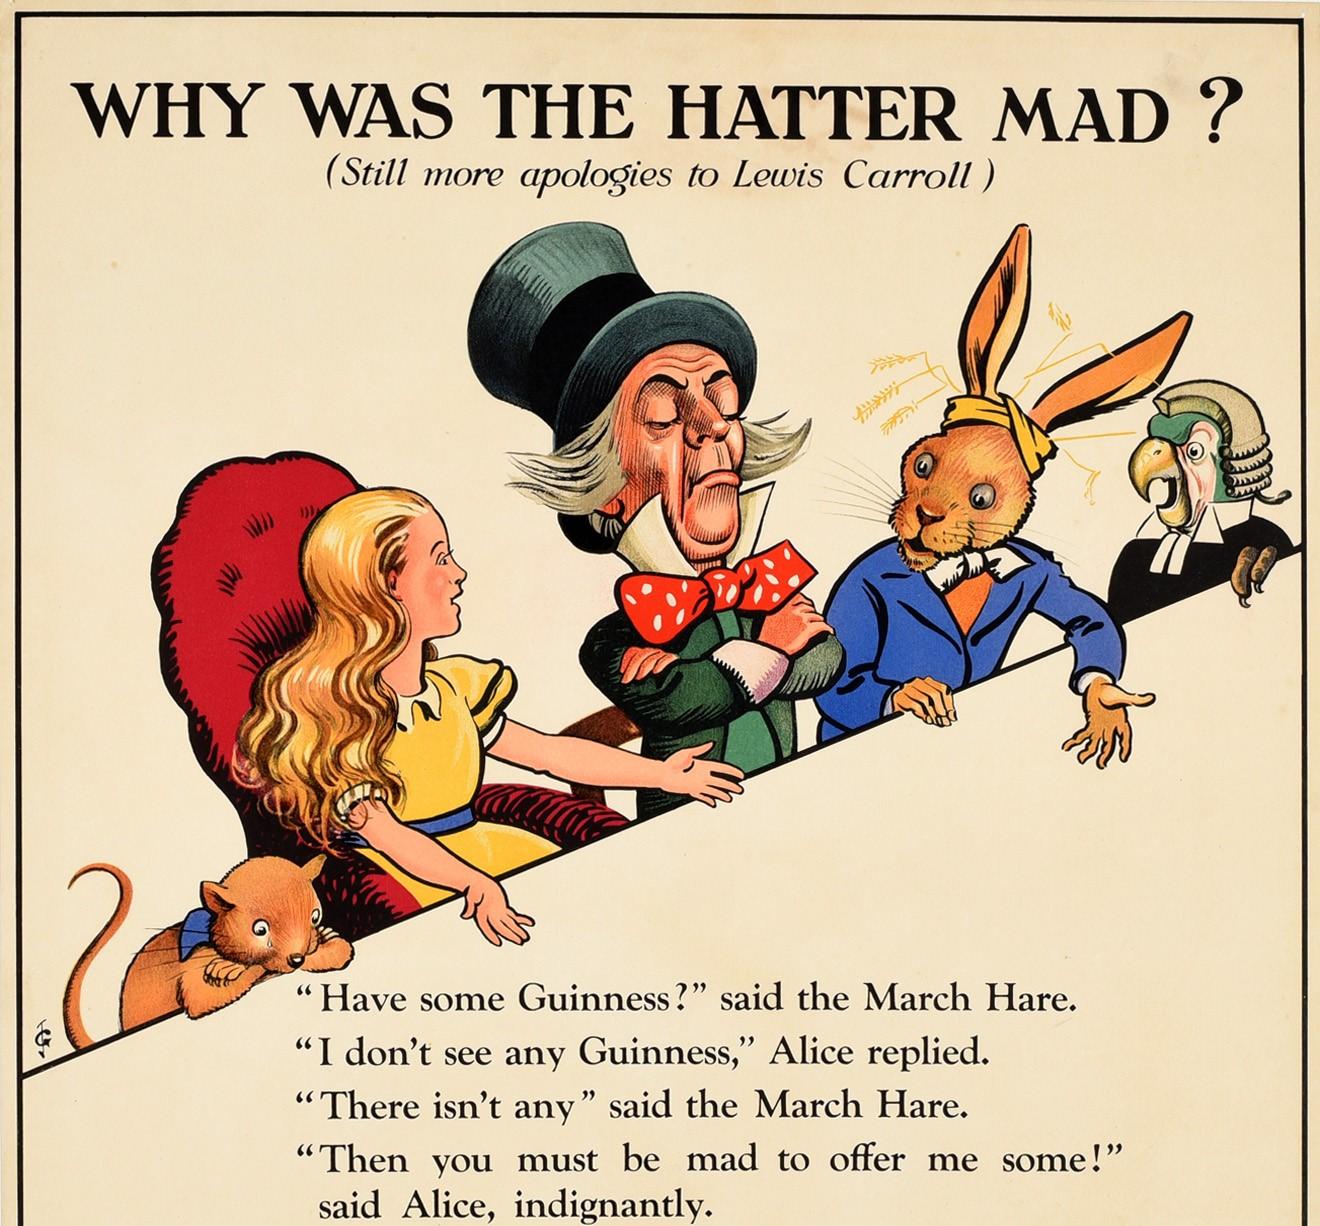 Original vintage Guinness advertising poster featuring a fun and rare Alice in Wonderland themed illustration by the notable artist John Gilroy (John Thomas Young Gilroy; 1898-1985) of the Mad Hatter's Tea Party depicting a colourful cartoon image